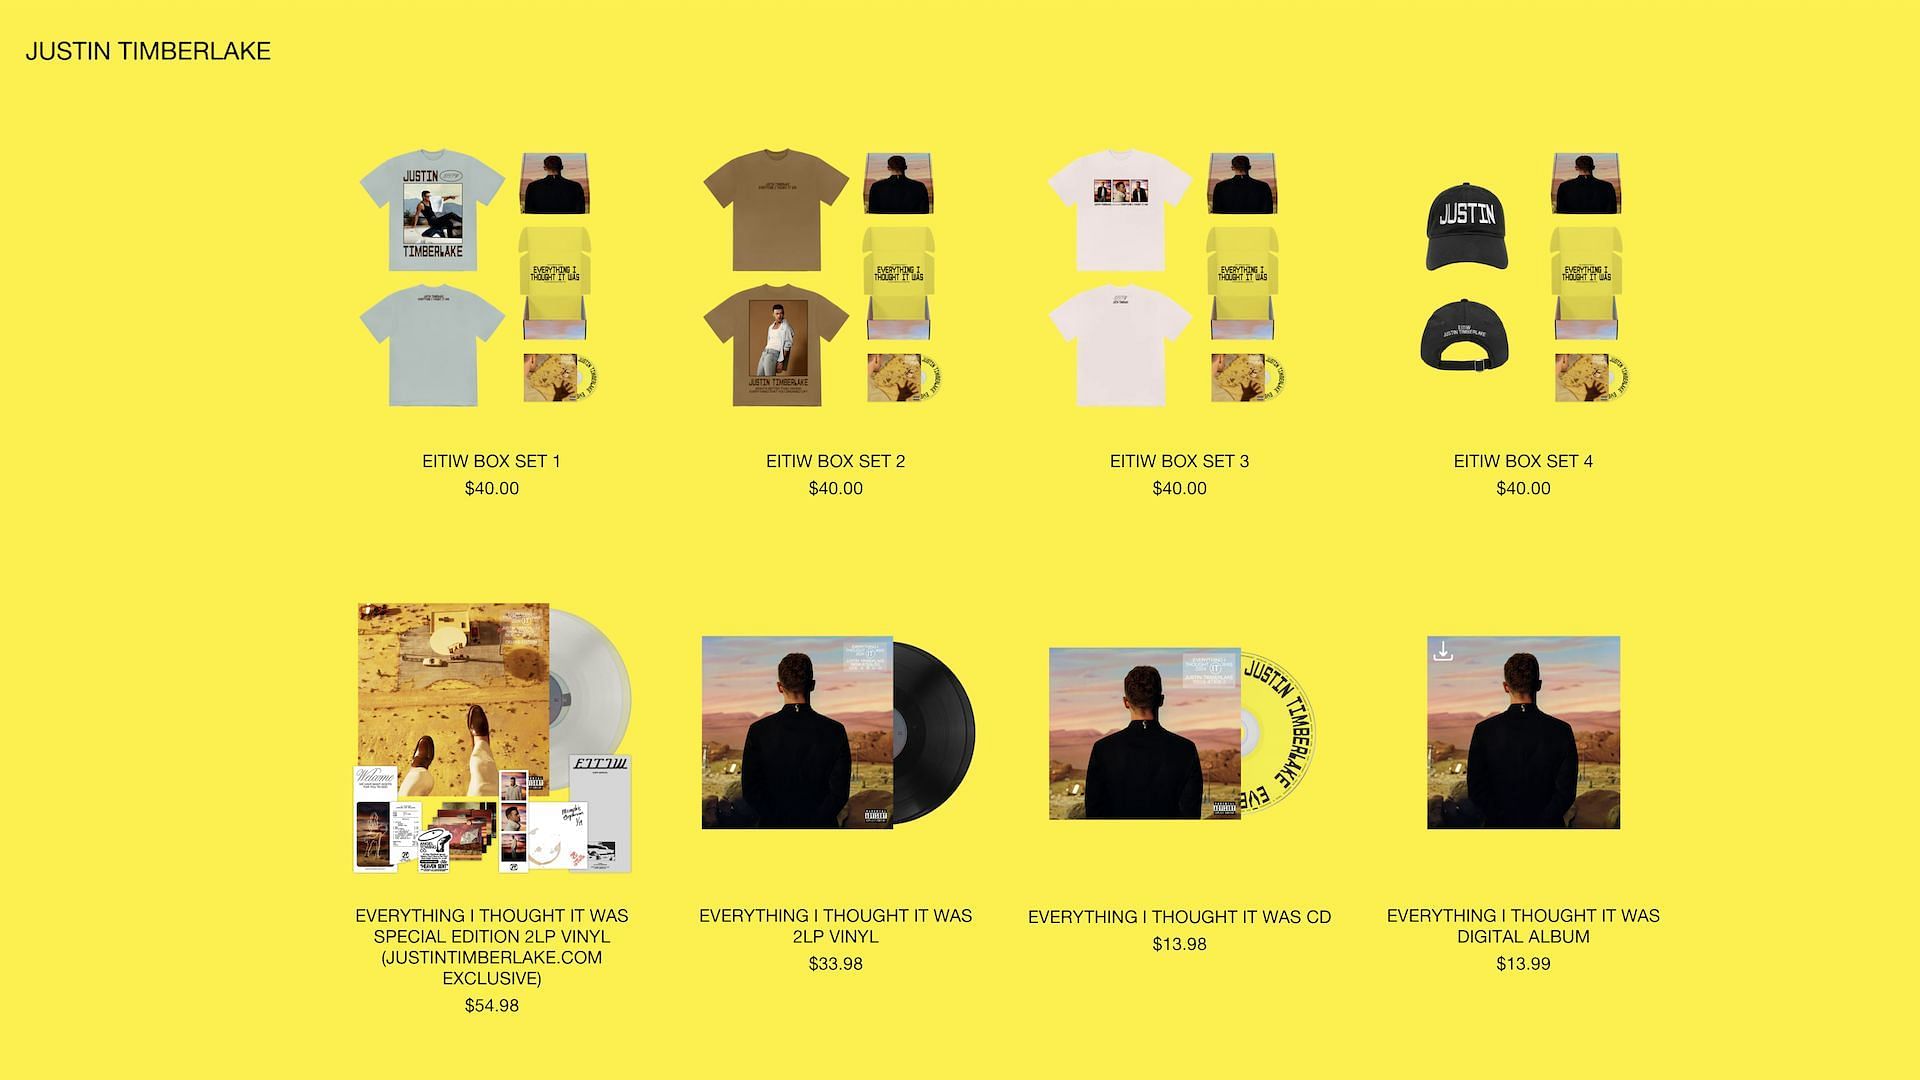 &#039;Everything I Thought It Was&#039; album merch and box sets available on Justin Timberlake&#039;s official website (Image via shop.justintimberlake.com)